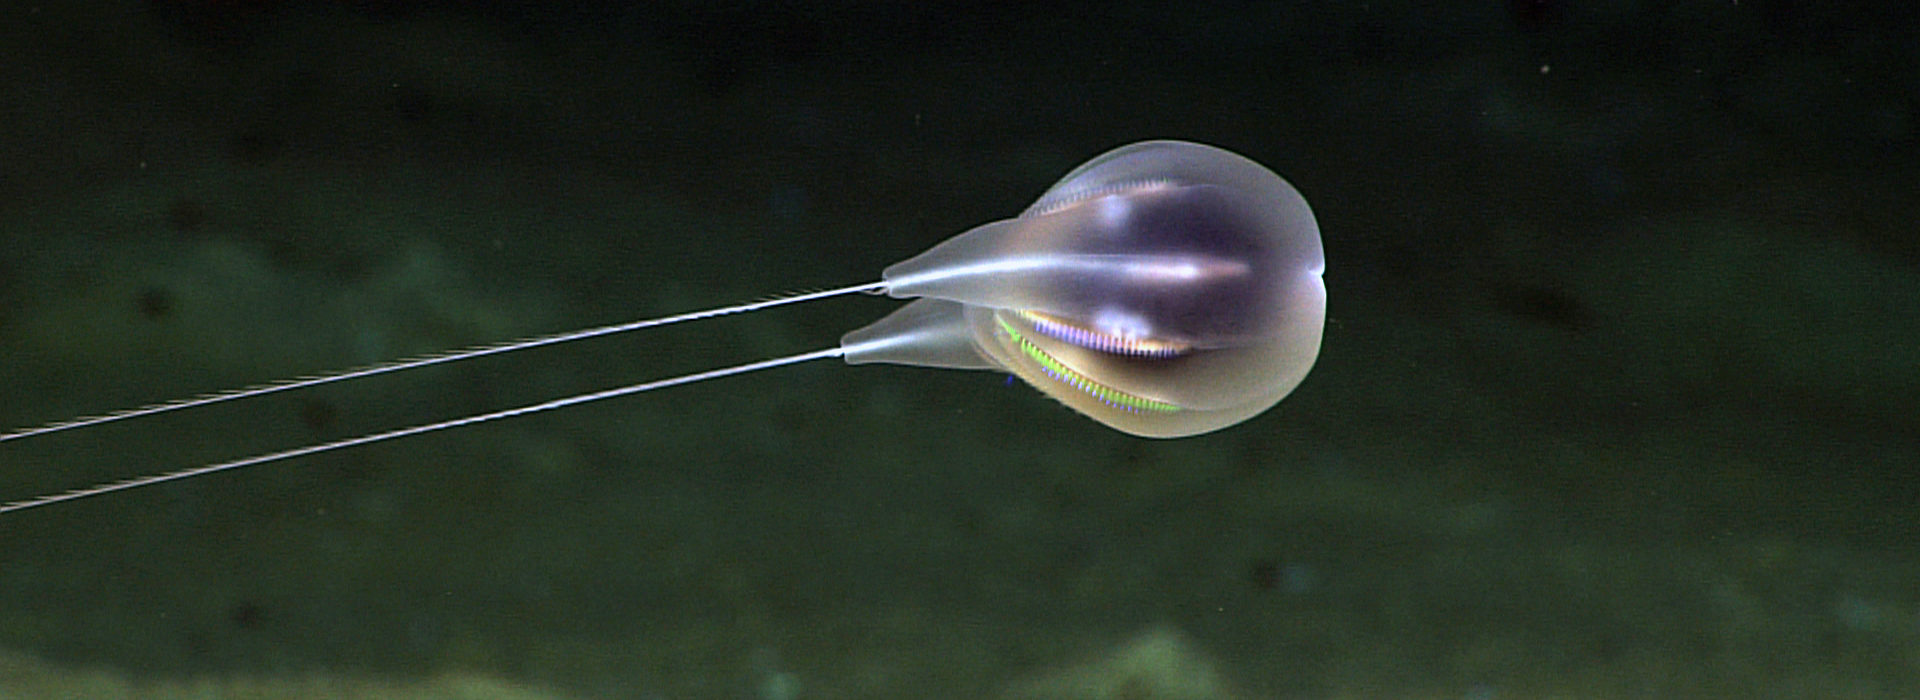 A round, translucent deep sea creature with two long thread-like tails.